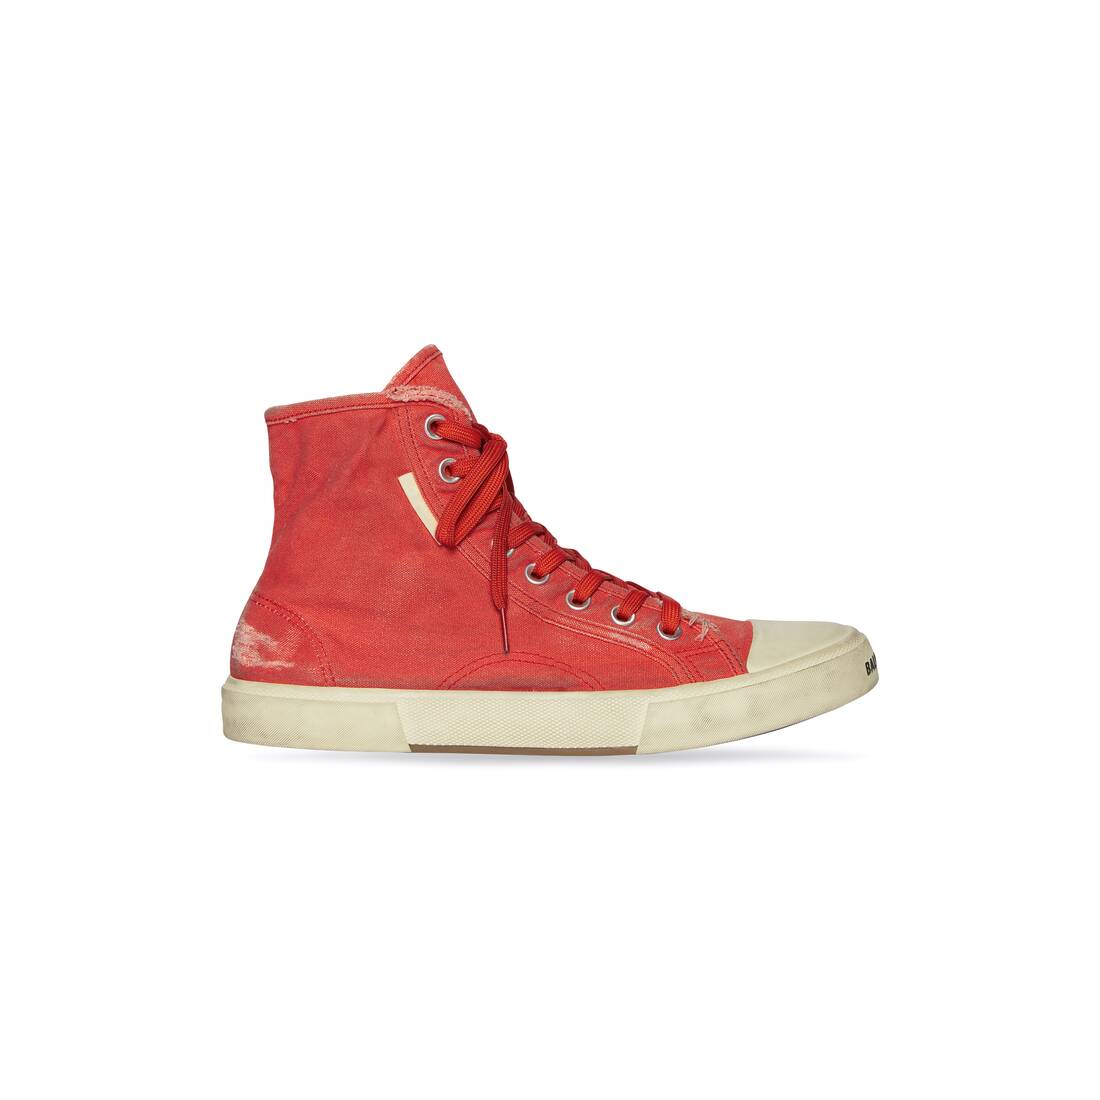 Paris High Top Sneaker in red destroyed cotton and white rubber